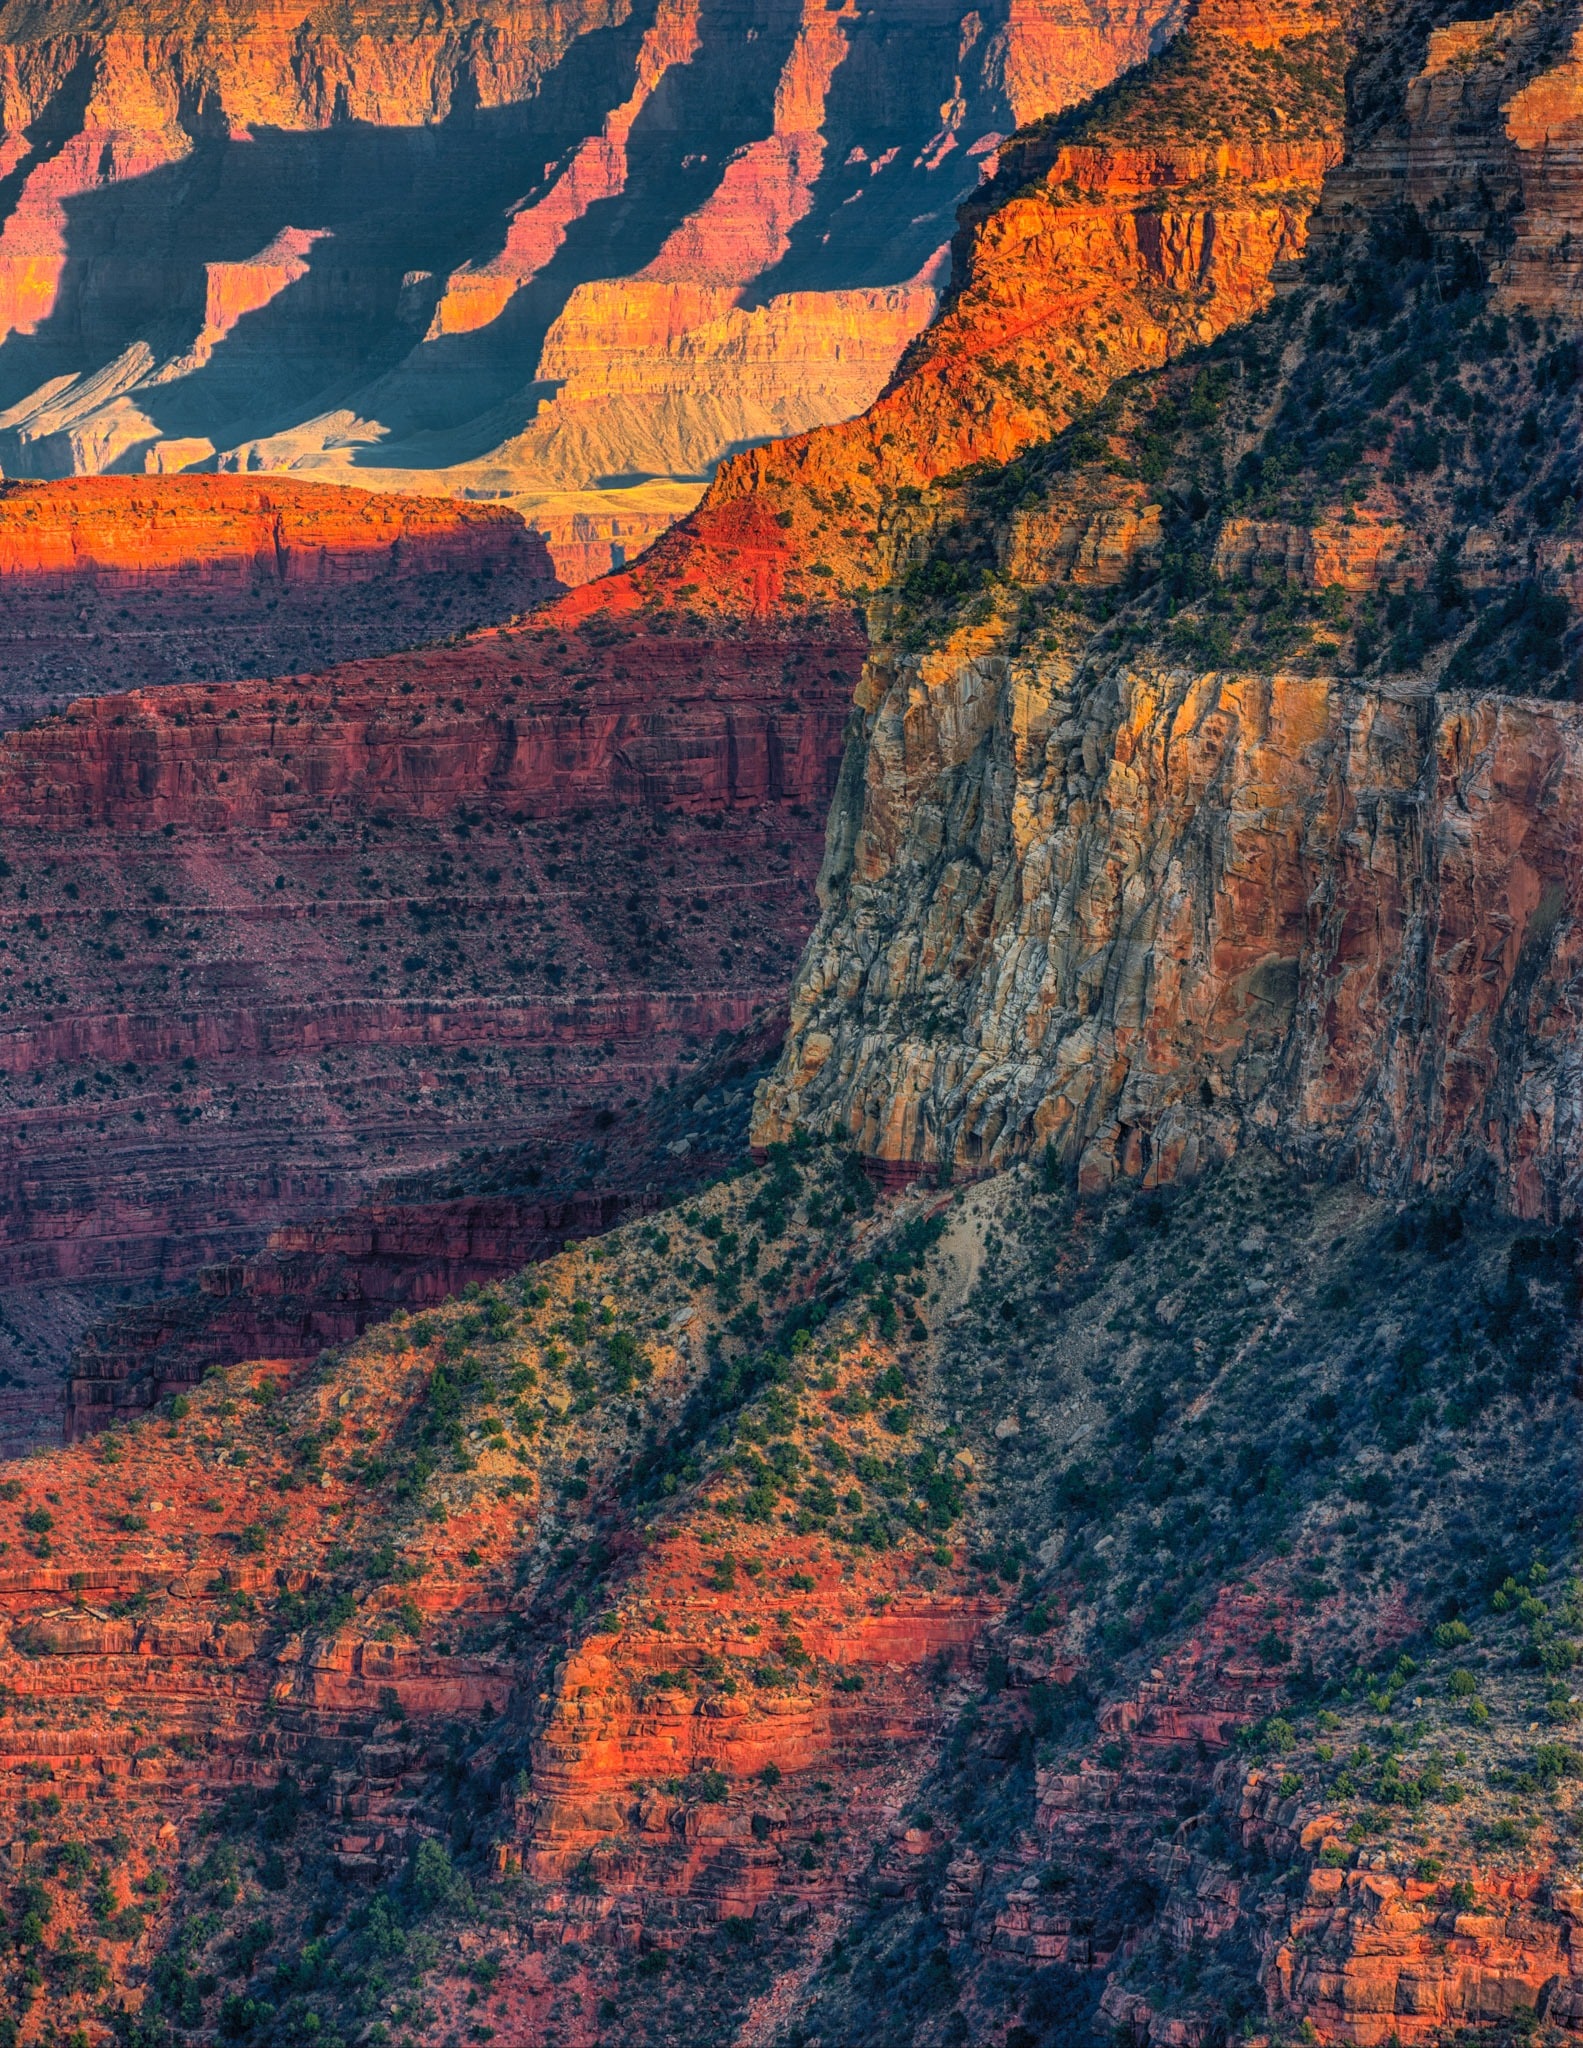 A view of the upper rock formations of the Grand Canyon as seen from the South Rim in Arizona.